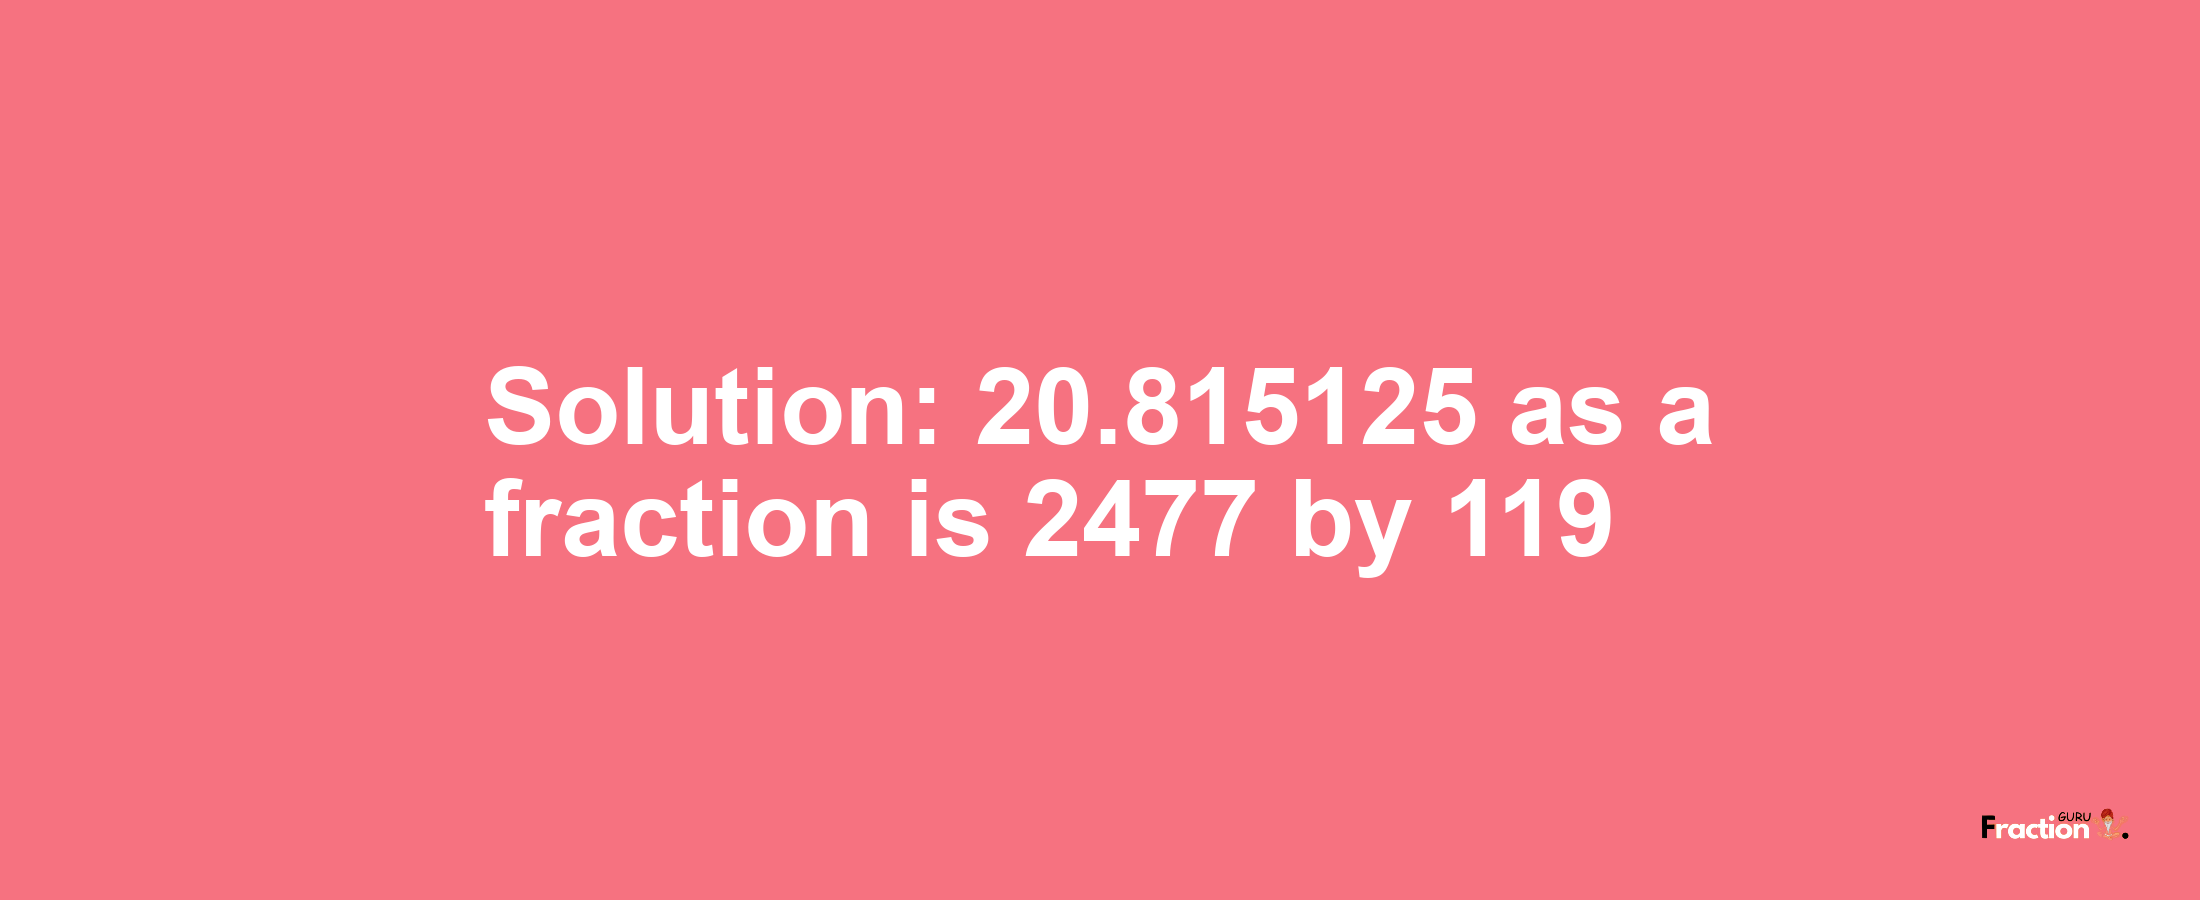 Solution:20.815125 as a fraction is 2477/119